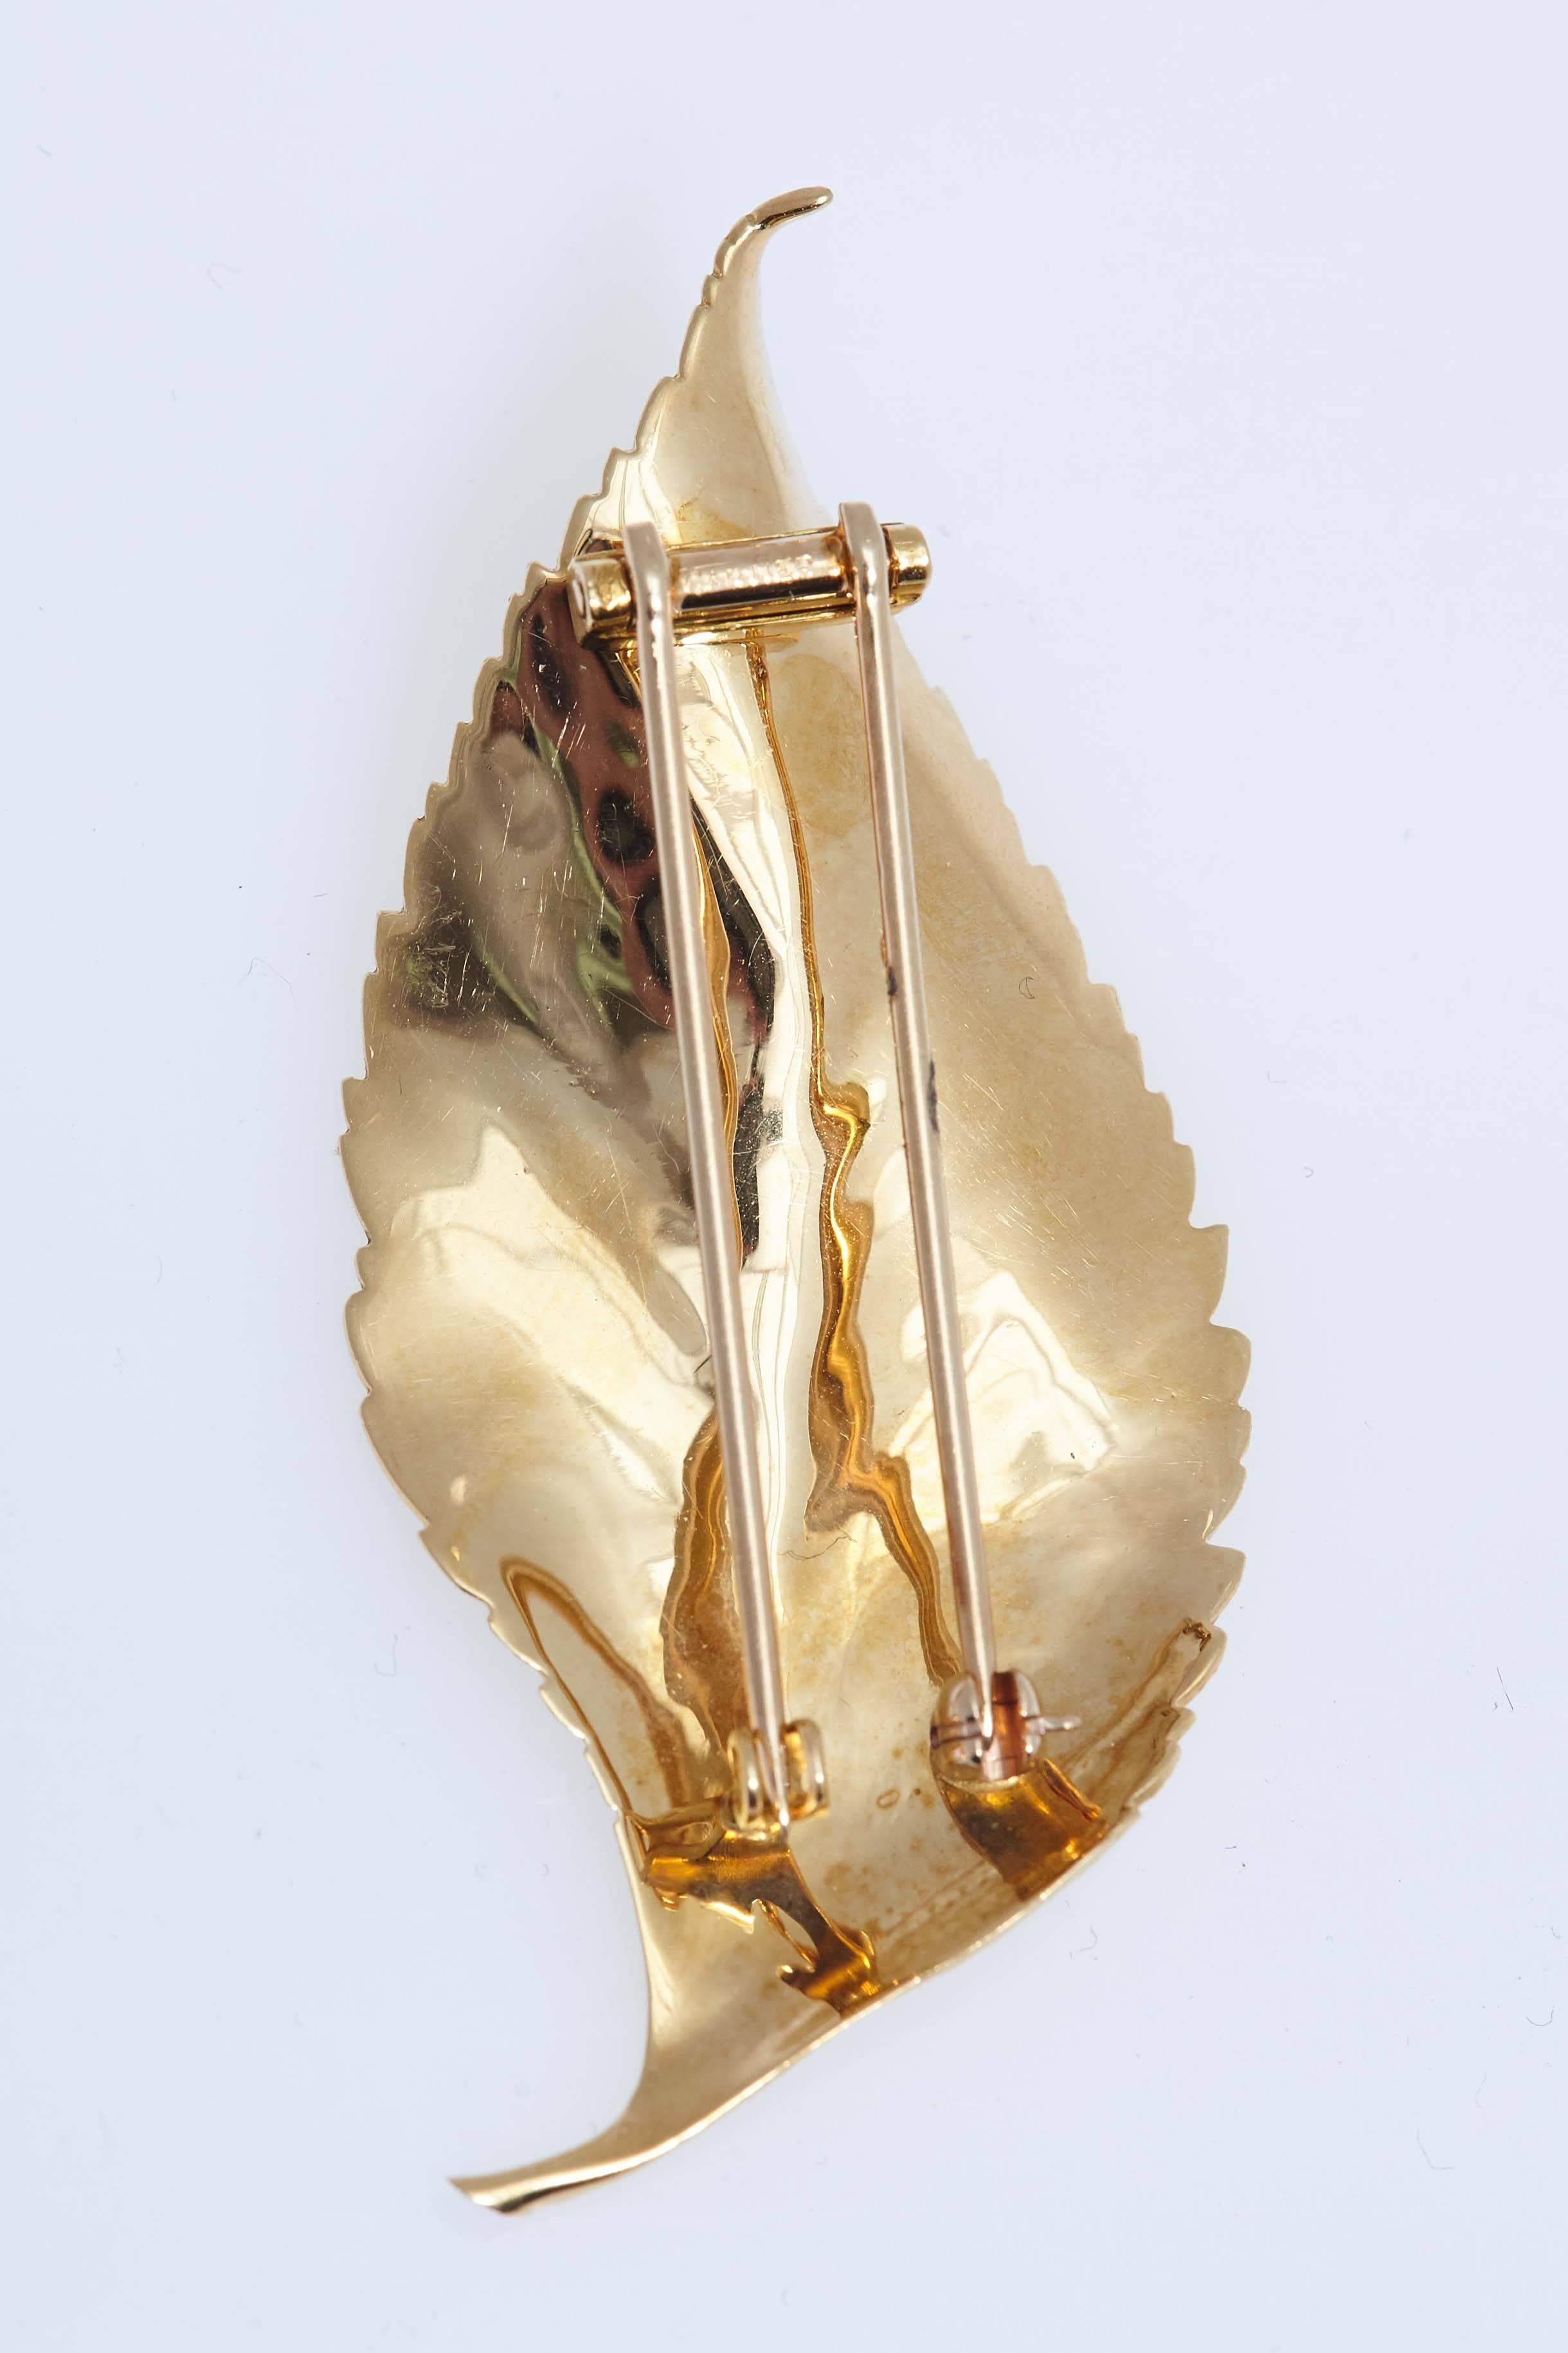 Cartier 18 karat yellow gold leaf pin.  The pin measures 2 1/2 inches long and 1 1/4 inches in width at its widest point. Stamped "CARTIER".